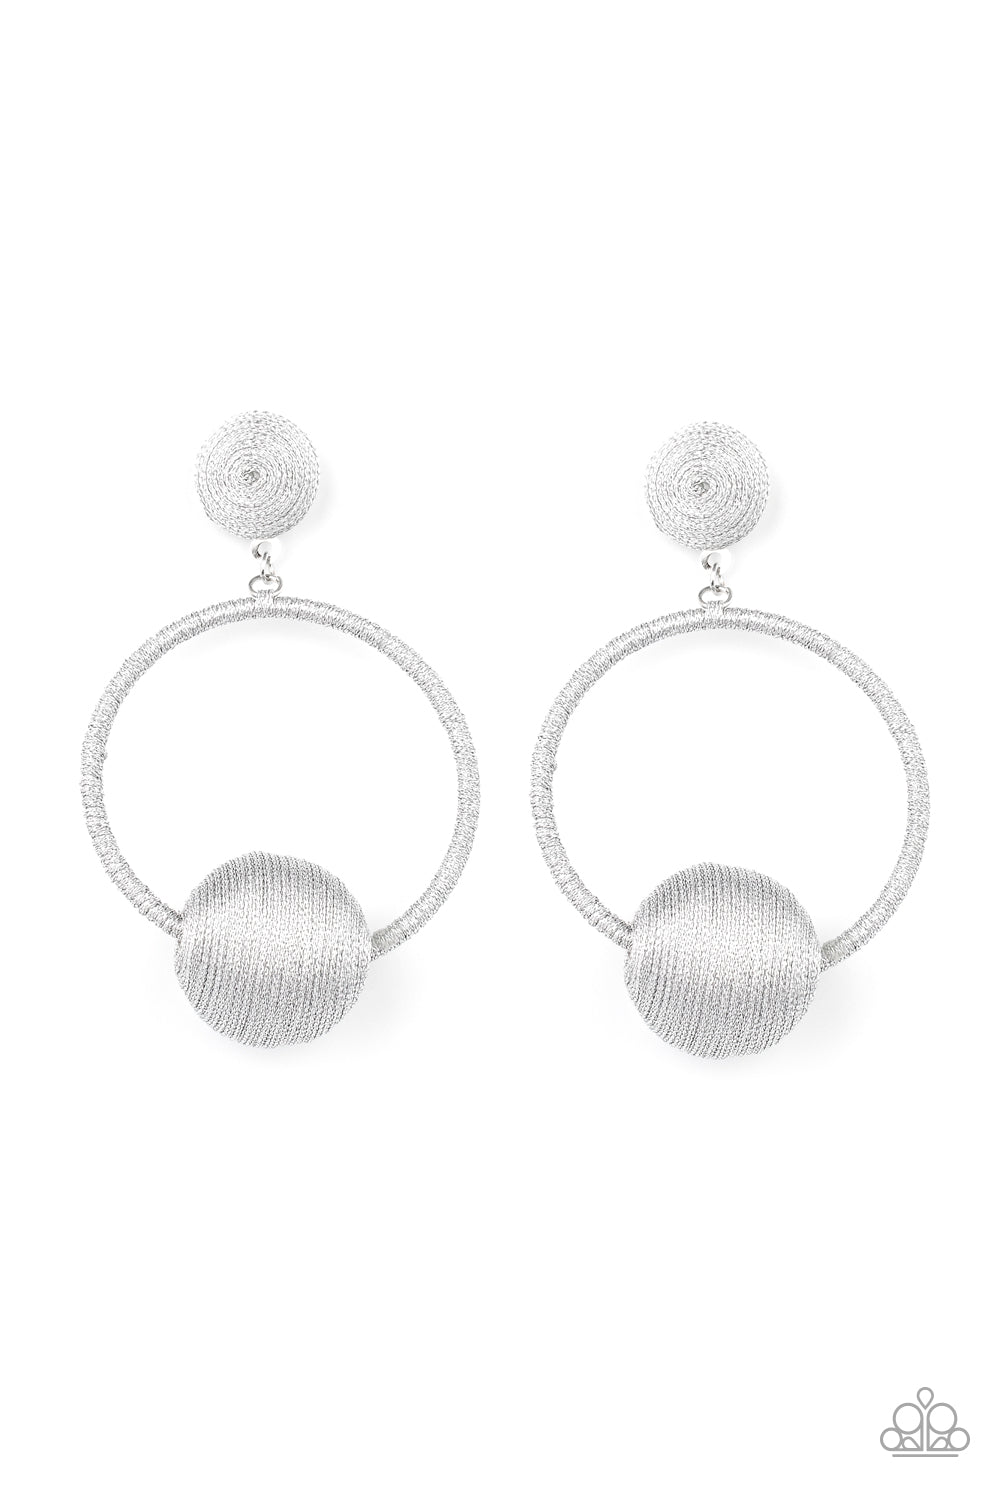 Shimmery silver thread wraps around an oversized bead that is fitted in place along the bottom of a matching threaded hoop